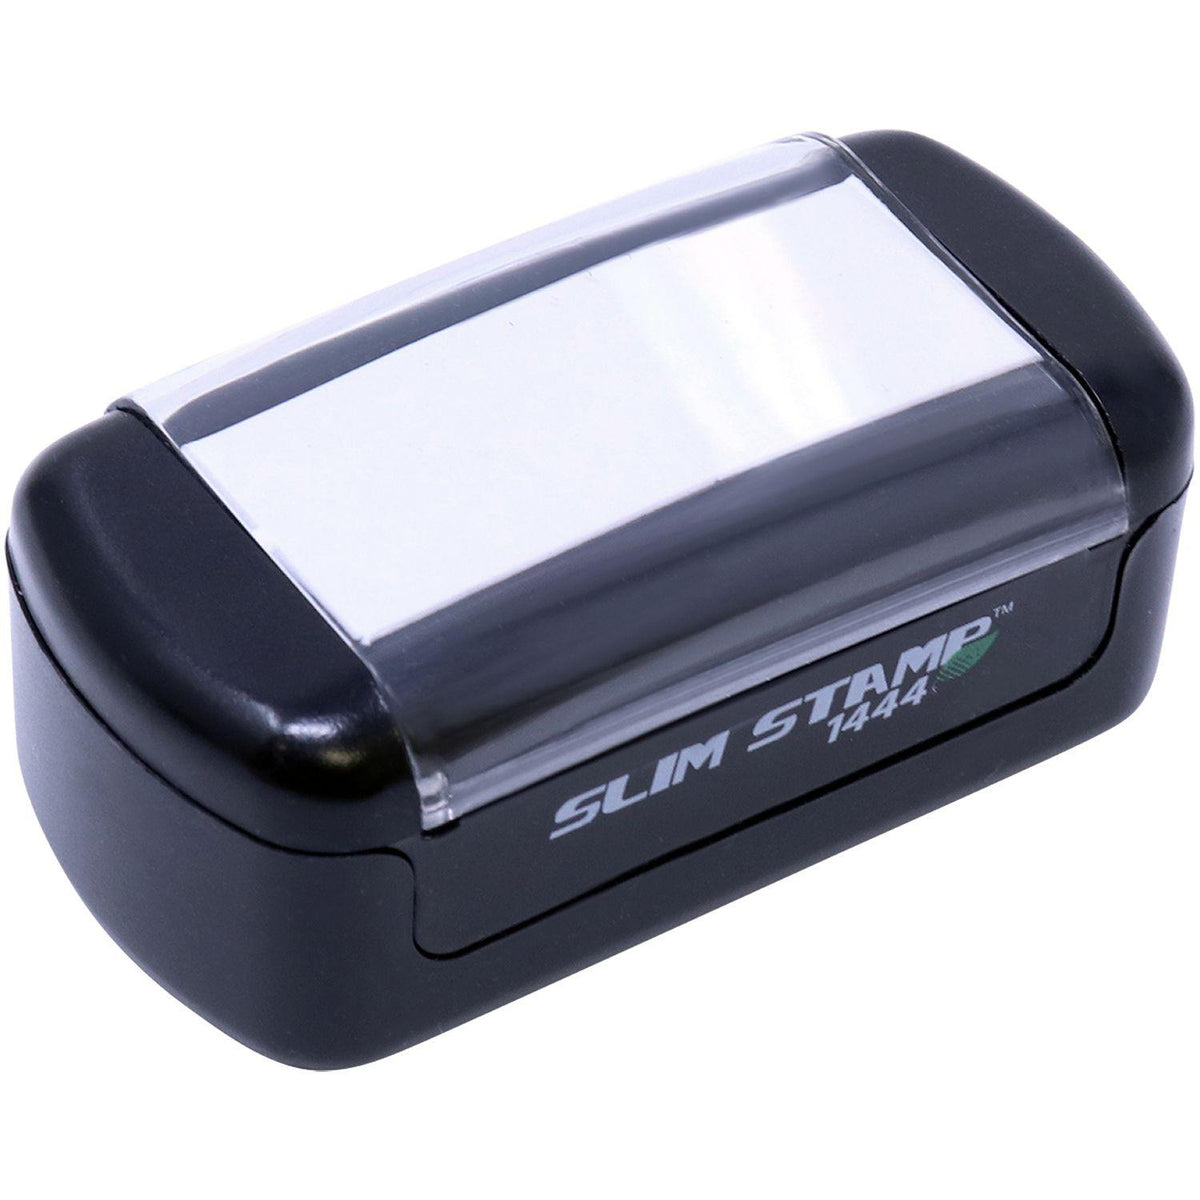 Slim Pre Inked 100 Stamp - Engineer Seal Stamps - Brand_Slim, Impression Size_Small, Stamp Type_Pre-Inked Stamp, Type of Use_General, Type of Use_Office, Type of Use_Teacher